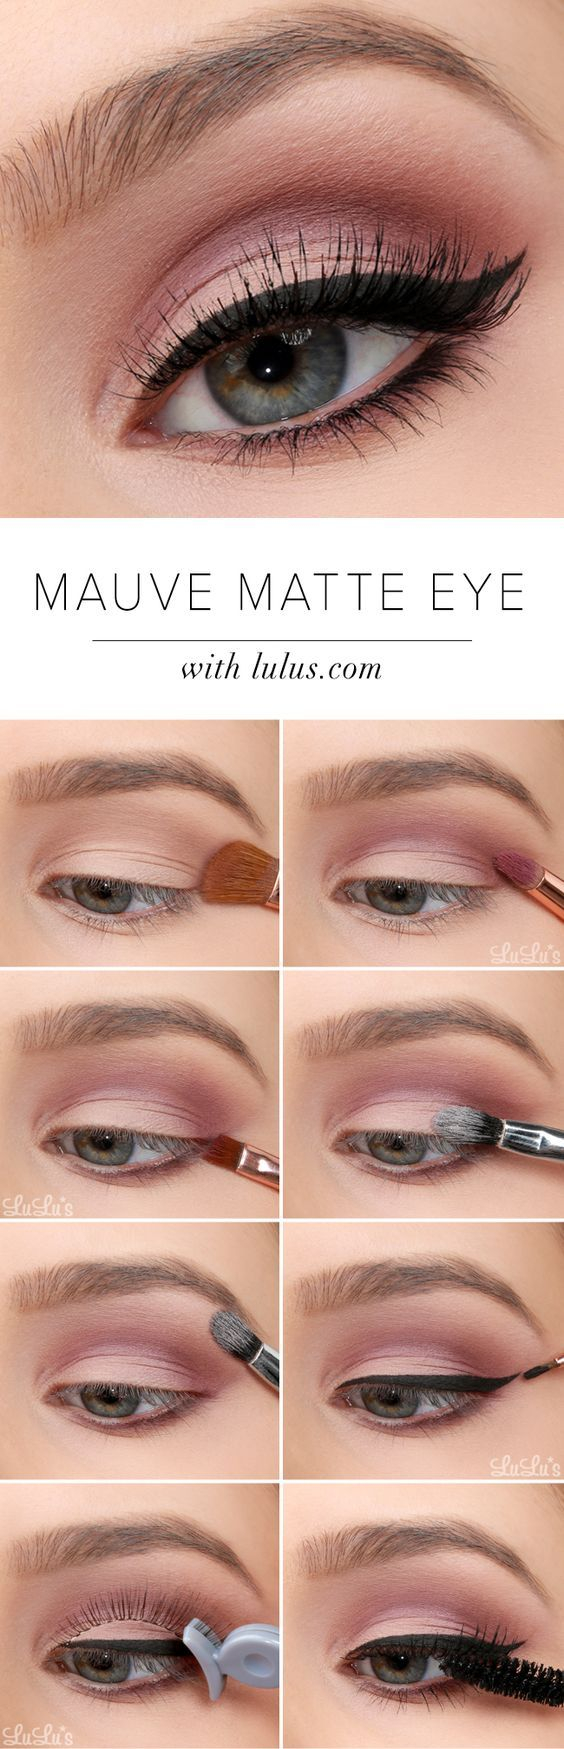 Prom Makeup For Hazel Eyes 11 Amazingly Gorgeous Makeup Ideas For Prom Night Trend To Wear